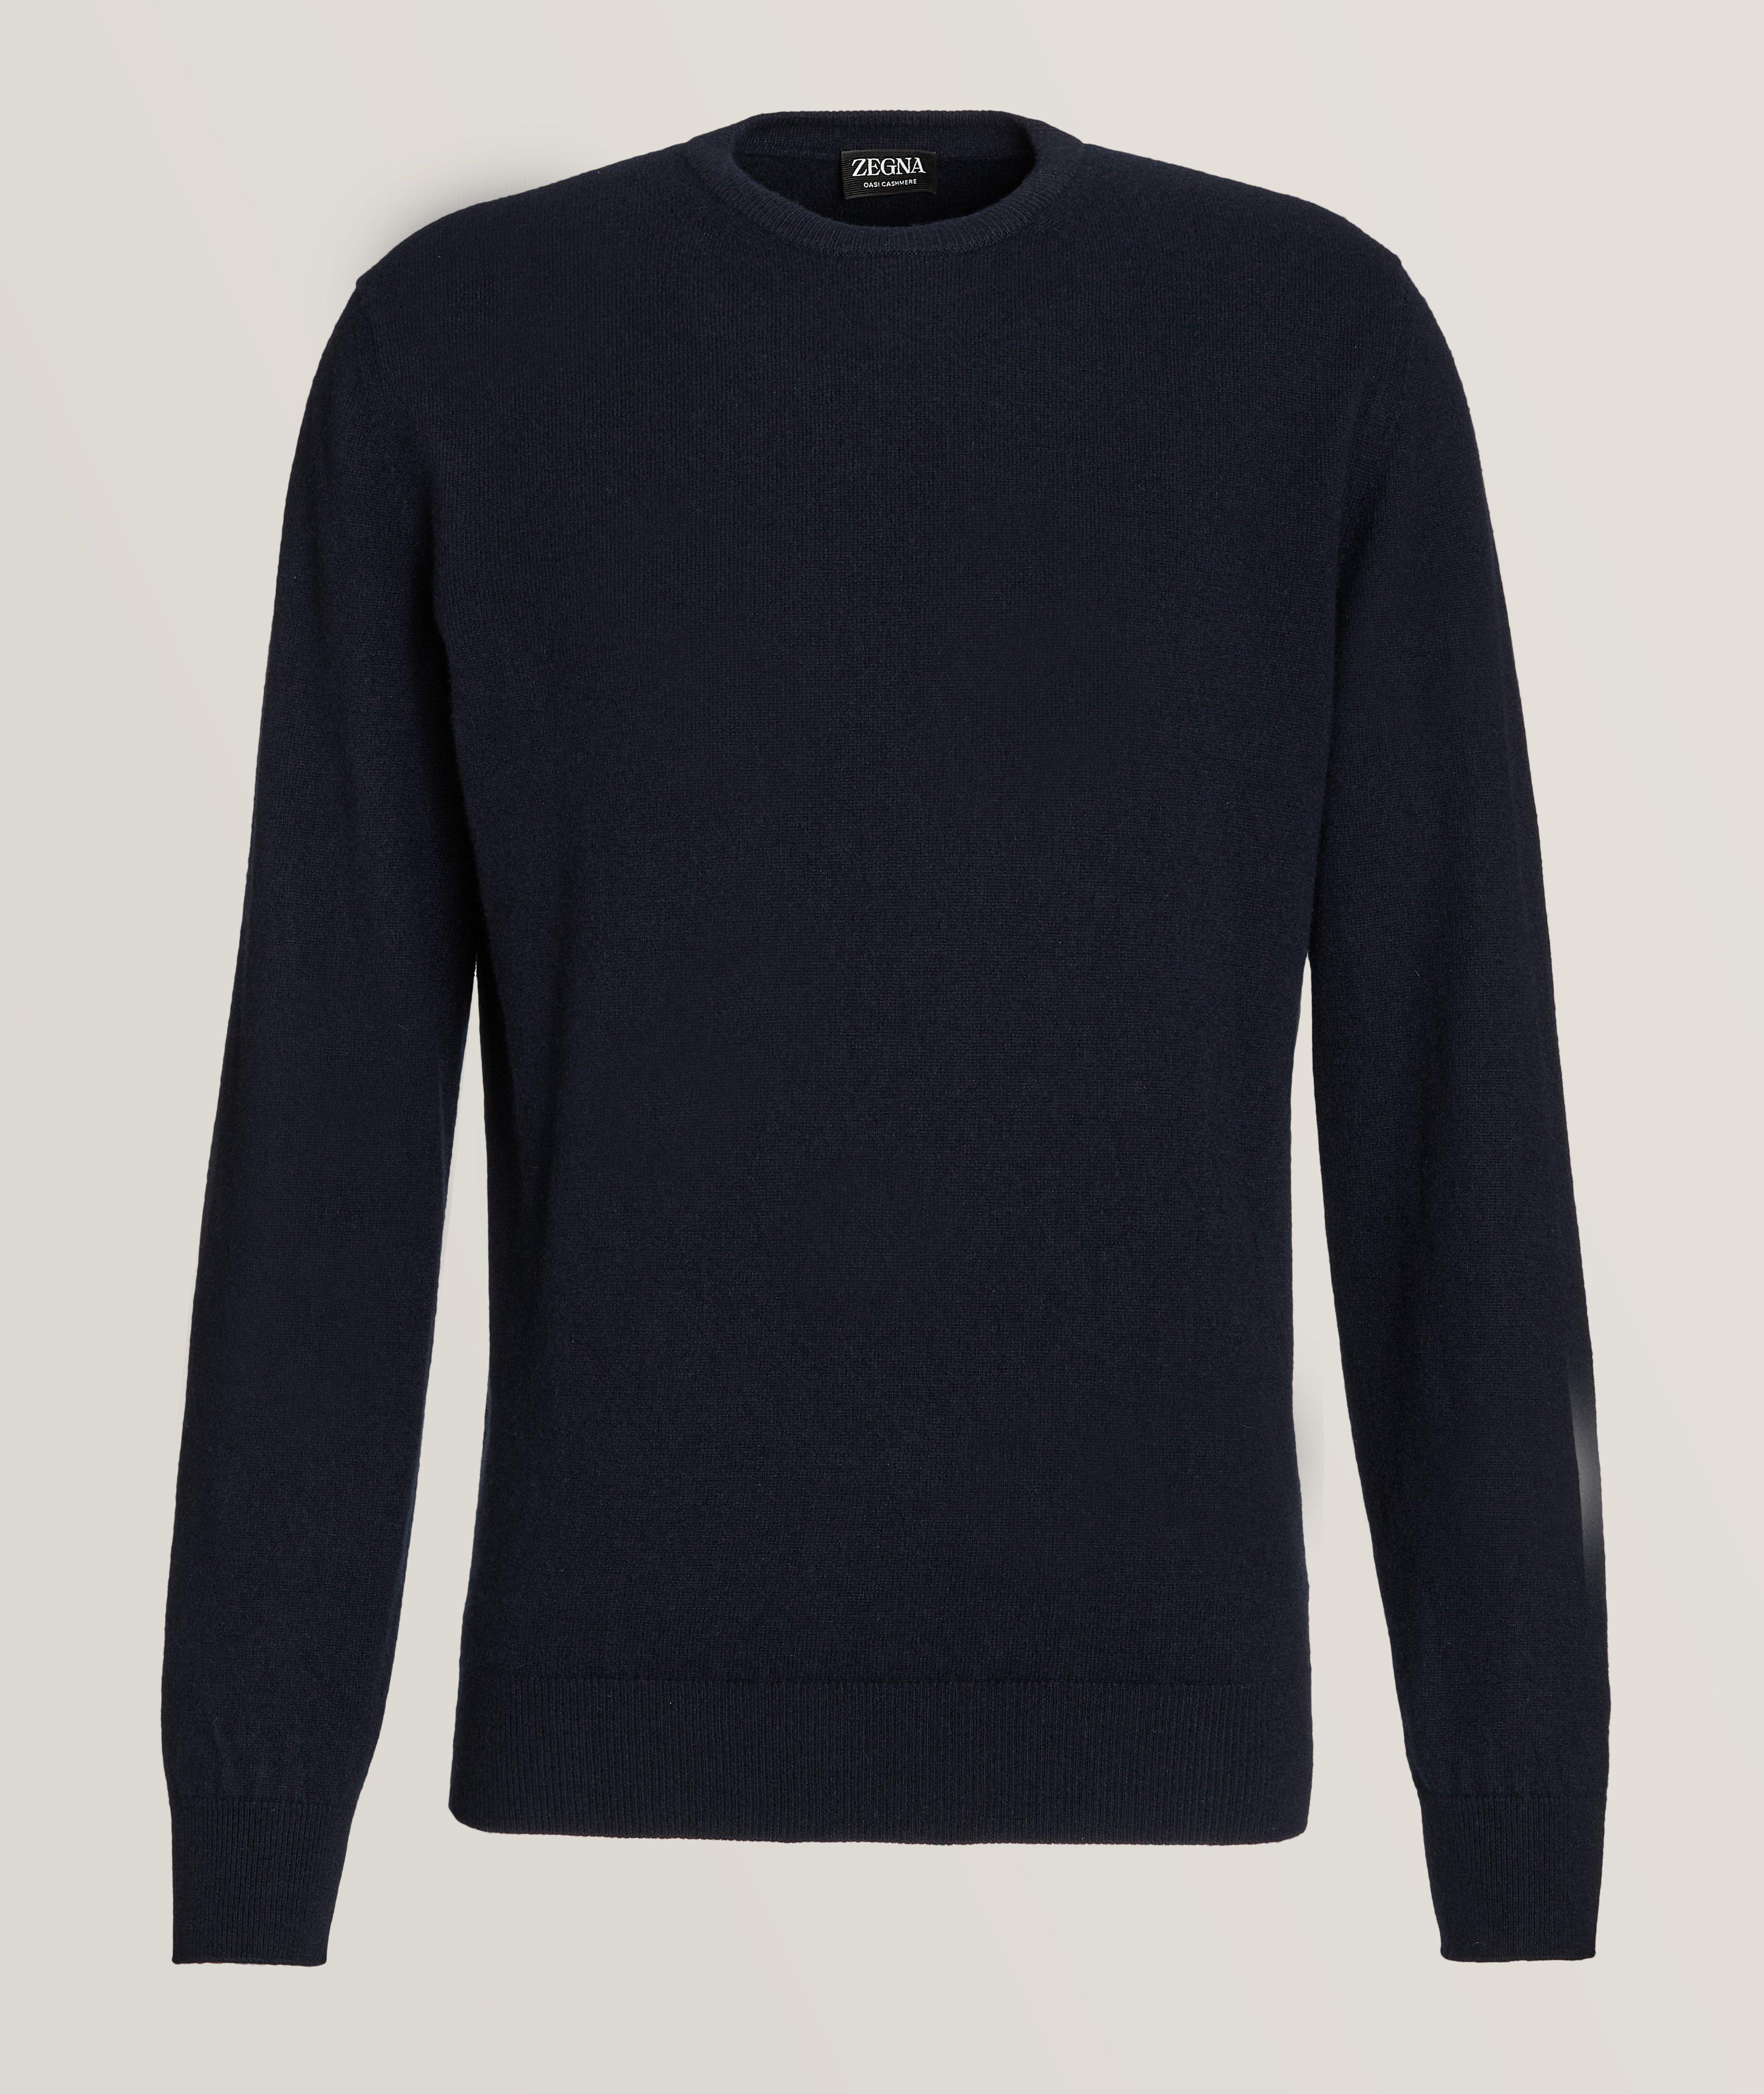 Oasi Cashmere Knitted Sweater image 0